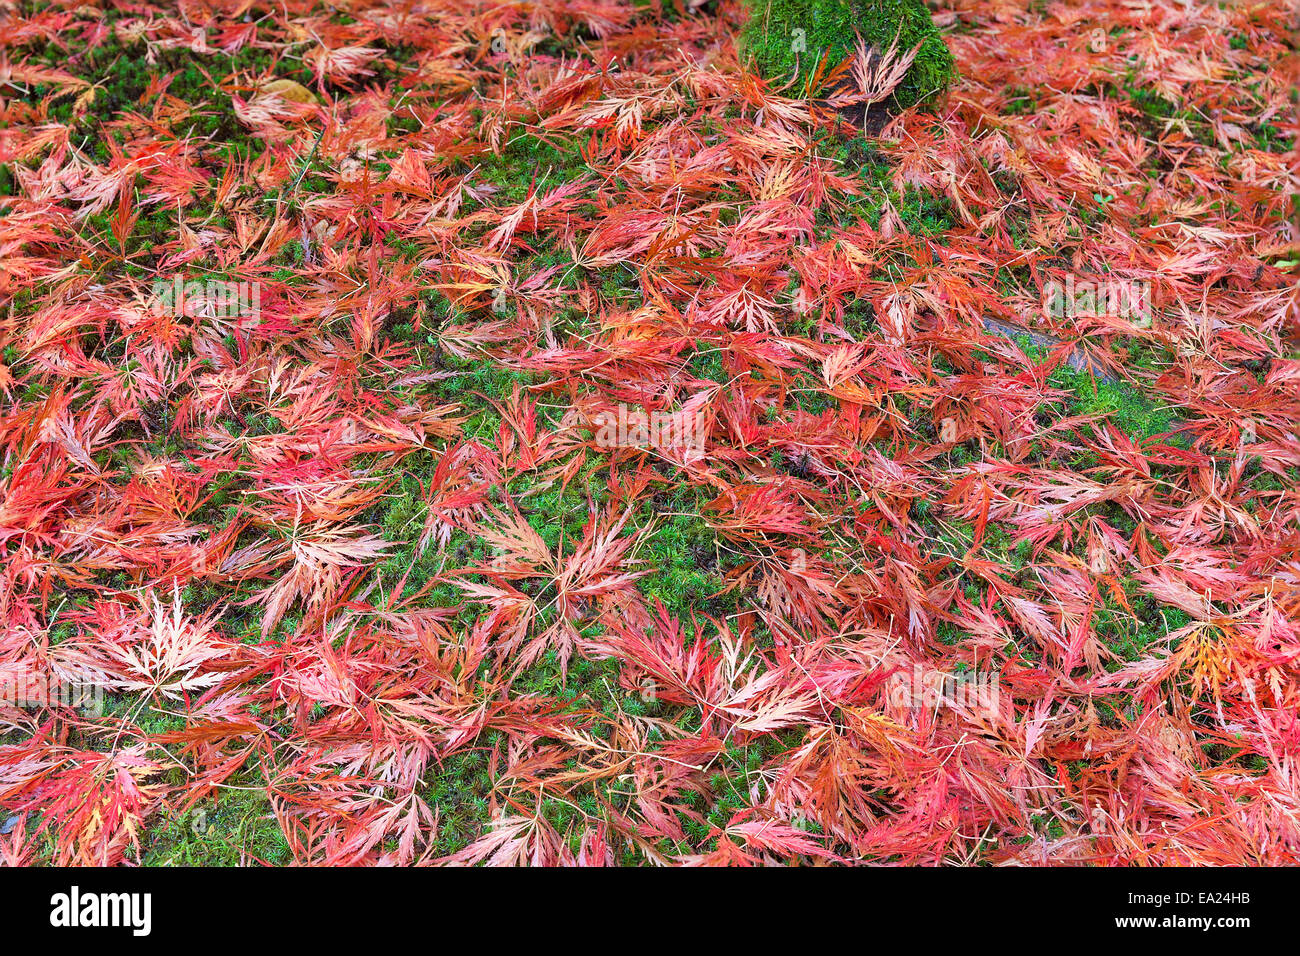 Japanese Maple Tree with Fallen Leaves on Mossy Ground in Autumn Background Stock Photo